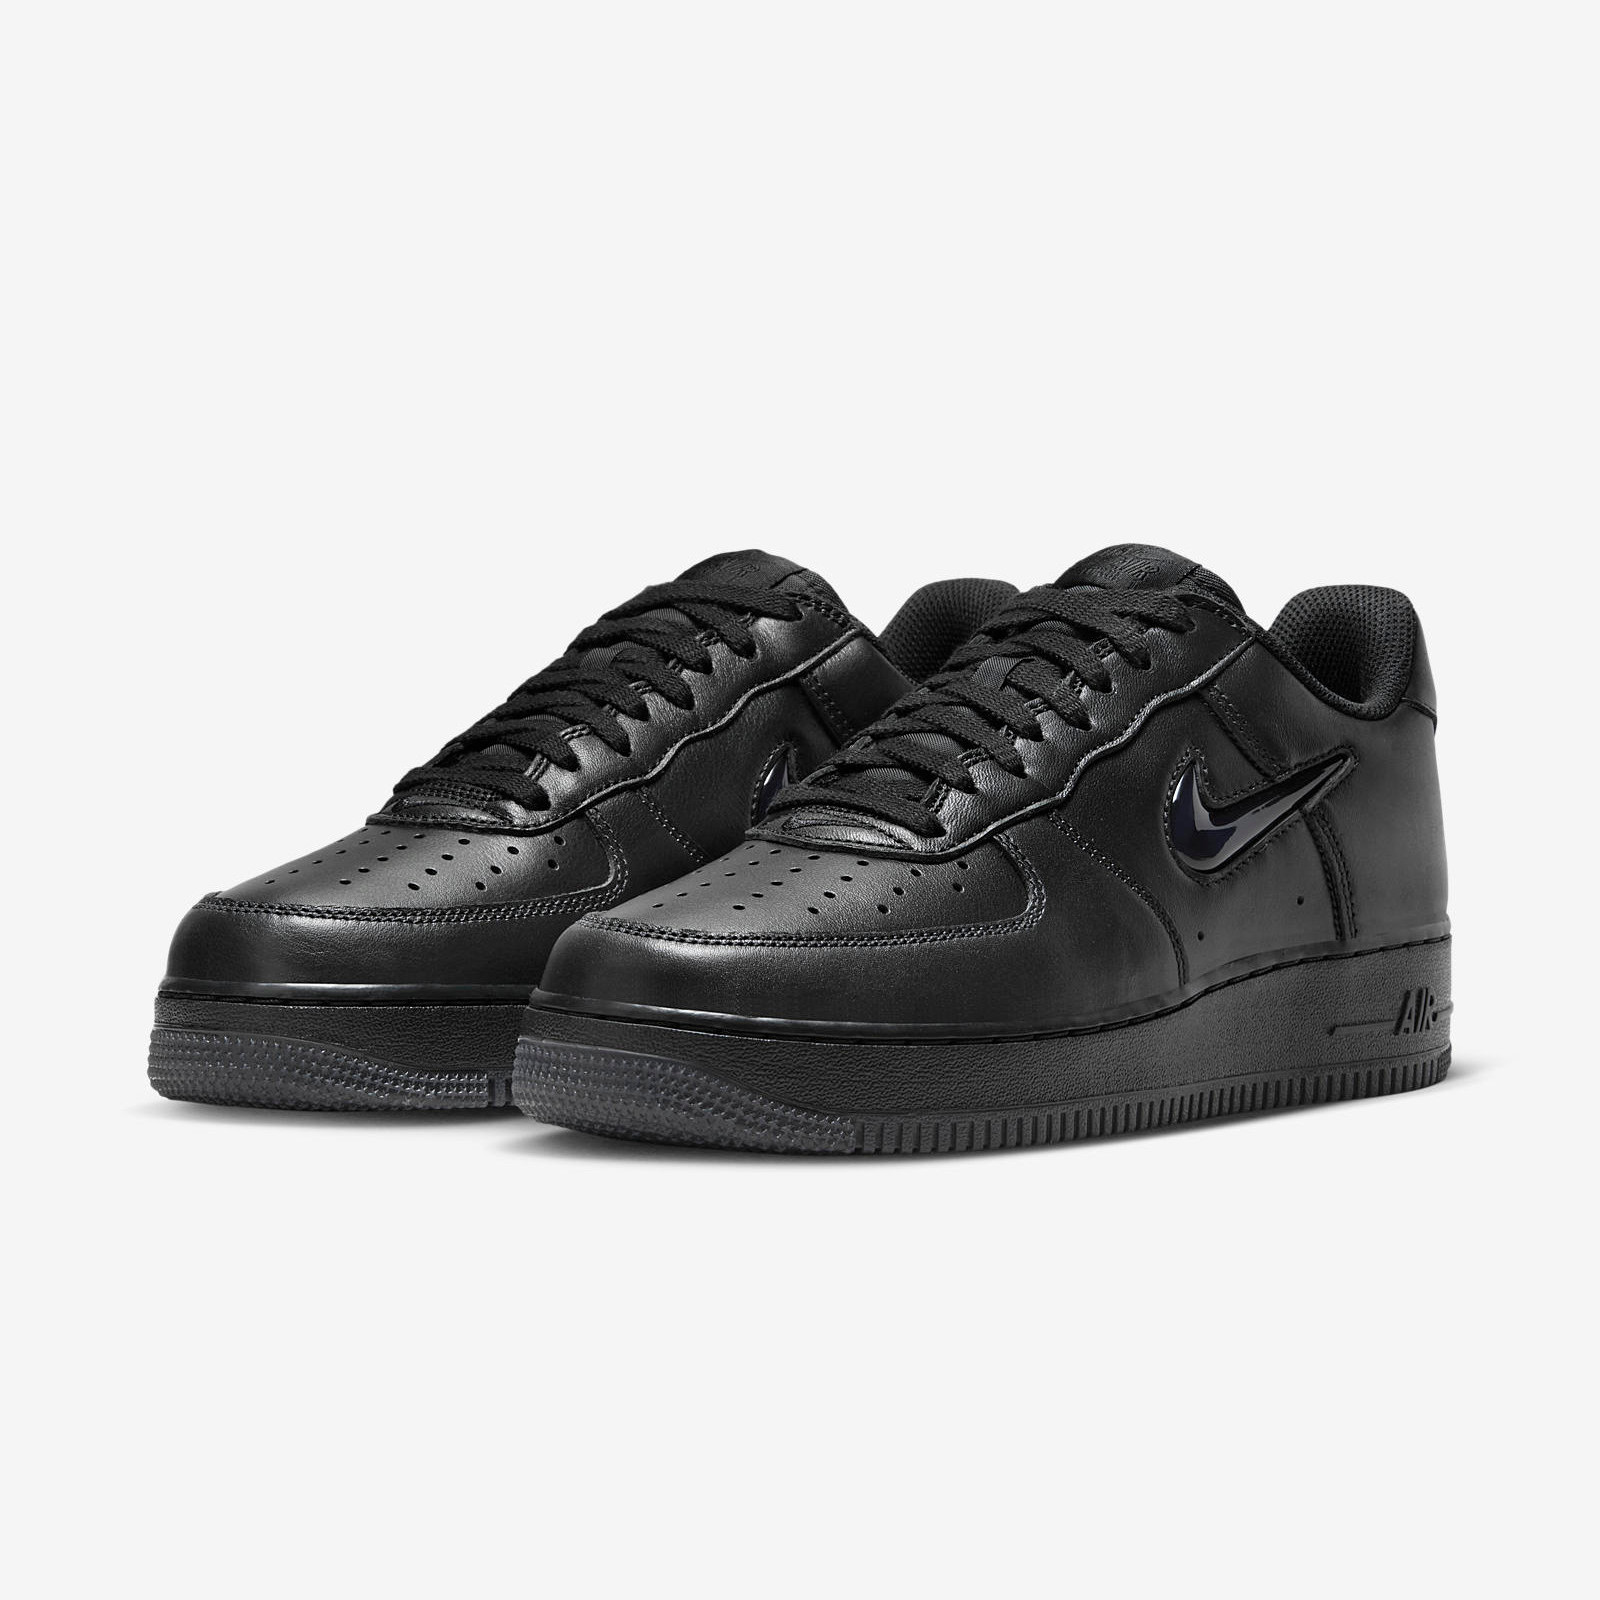 Nike Air Force 1 Low
Color of the Month